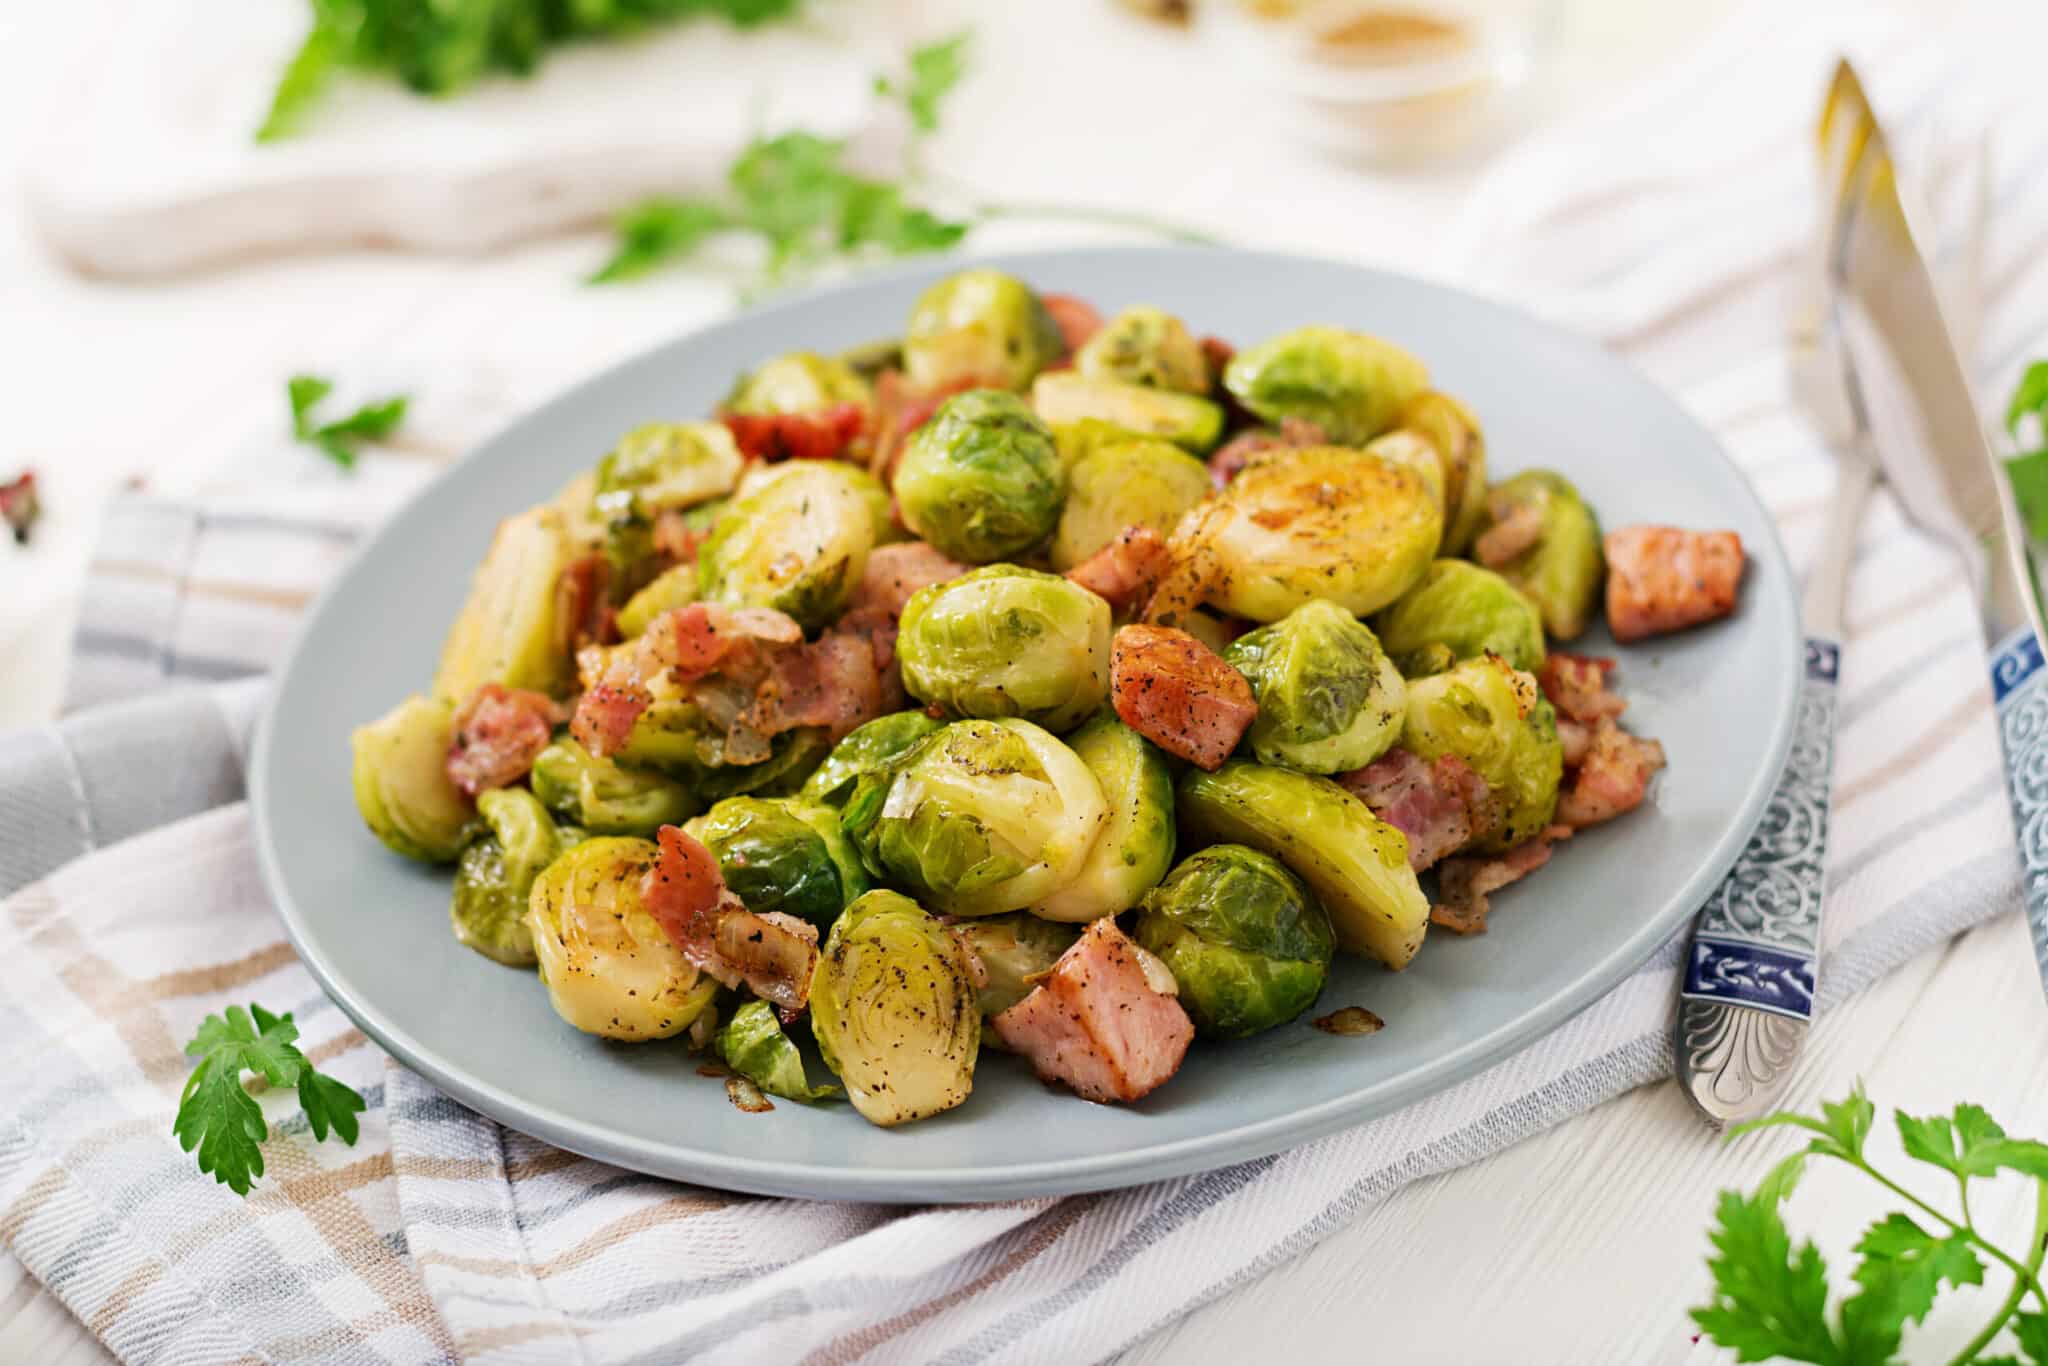 How To Cook Brussel Sprouts With Bacon